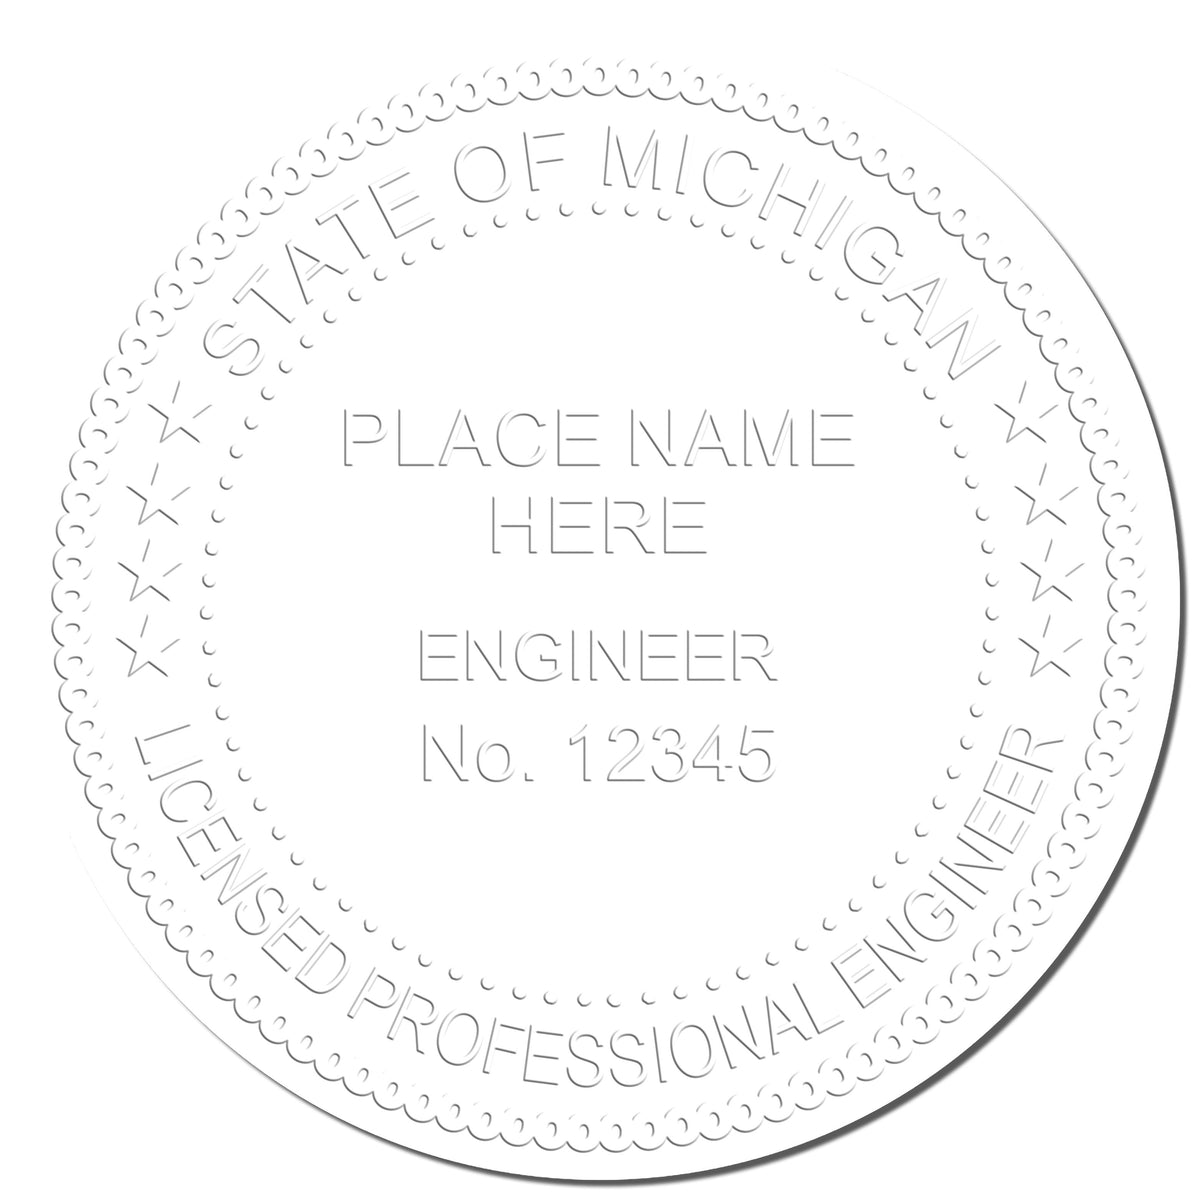 This paper is stamped with a sample imprint of the Gift Michigan Engineer Seal, signifying its quality and reliability.